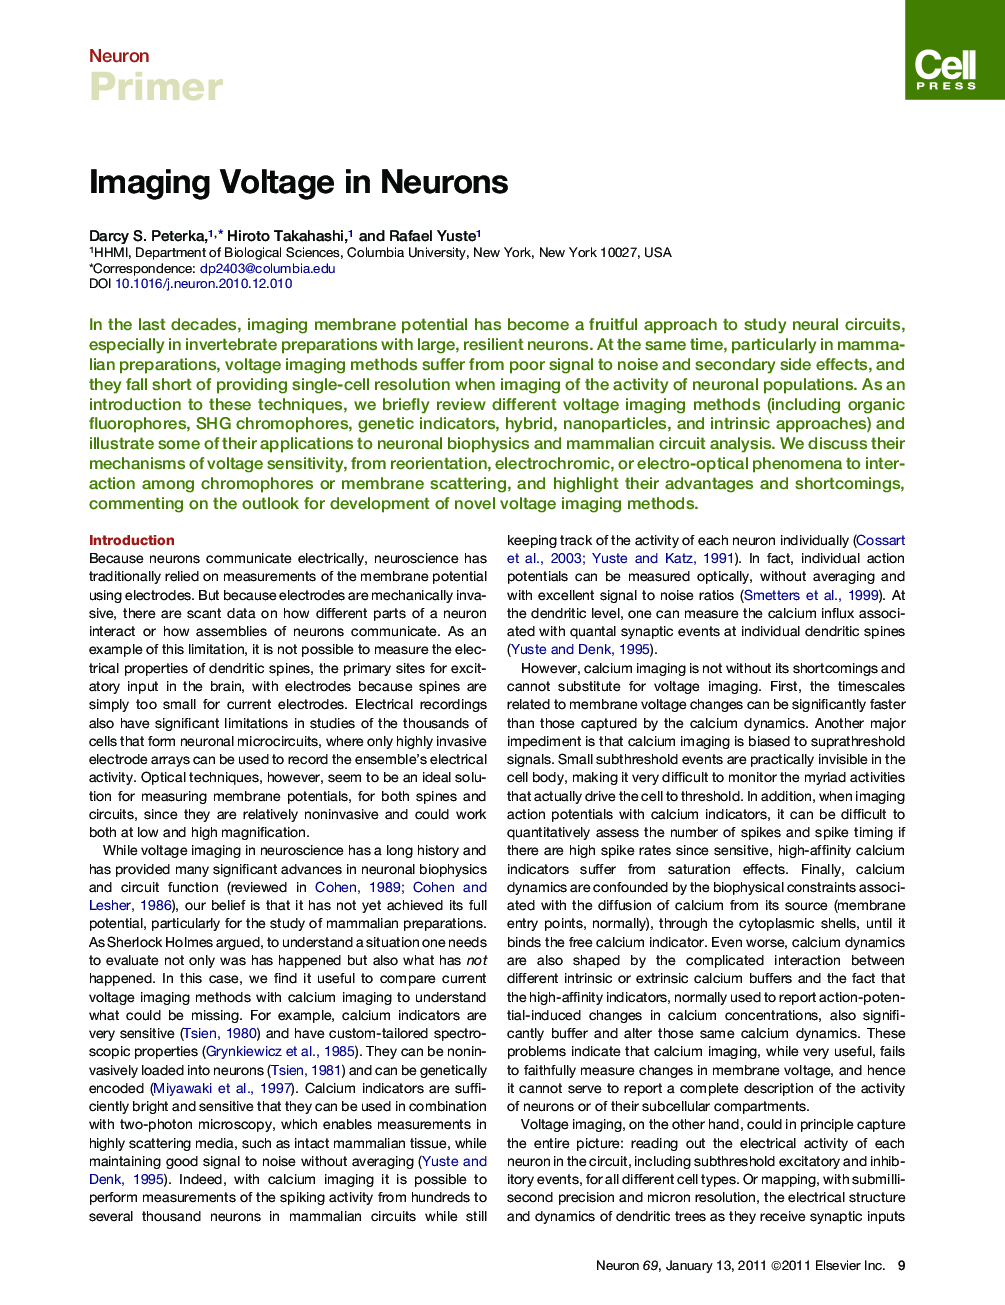 Imaging Voltage in Neurons